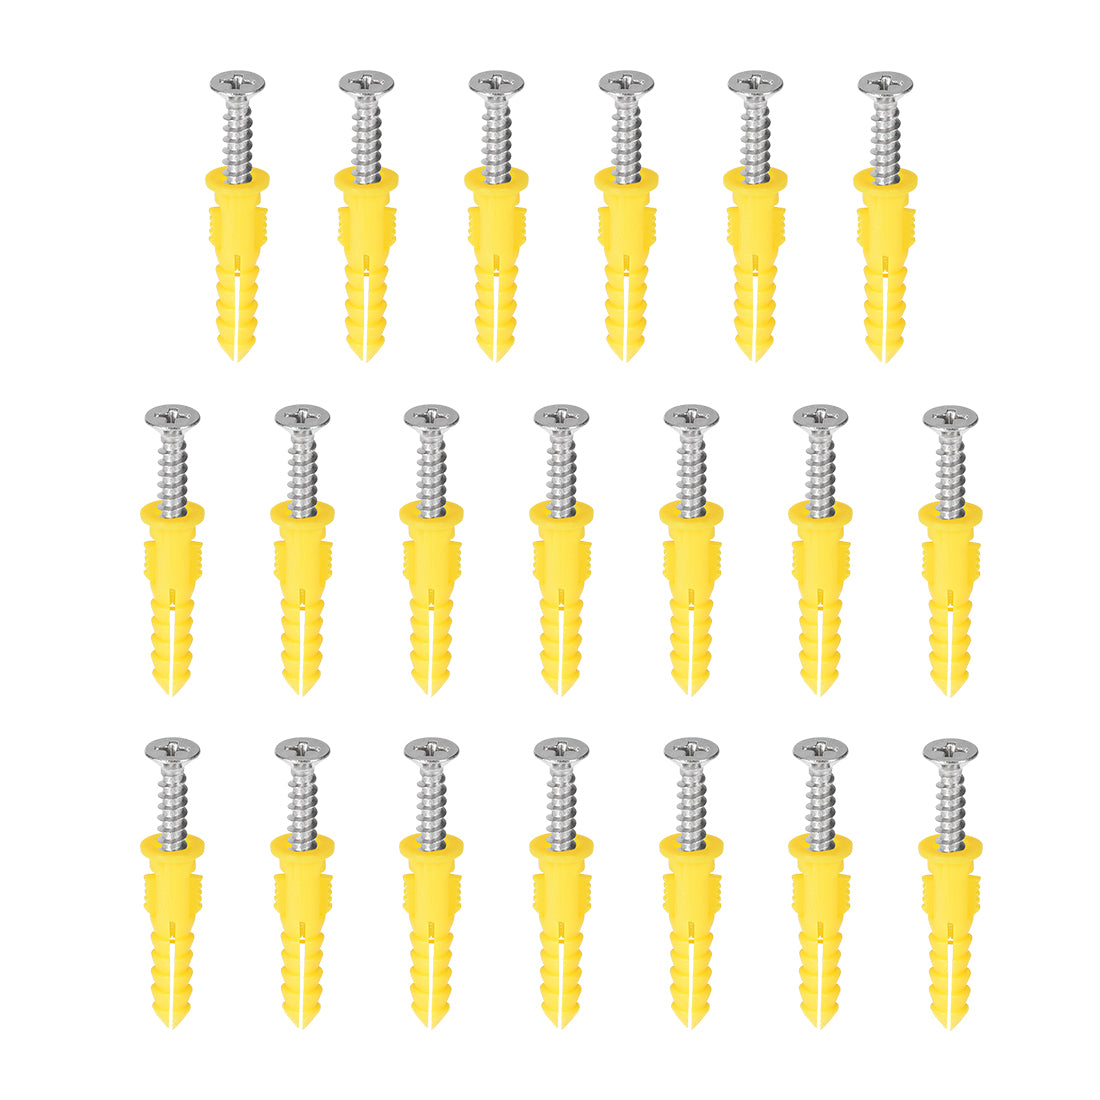 uxcell Uxcell 6x30mm Plastic Expansion Tube Pipe for Drywall with Screws Yellow 20pcs